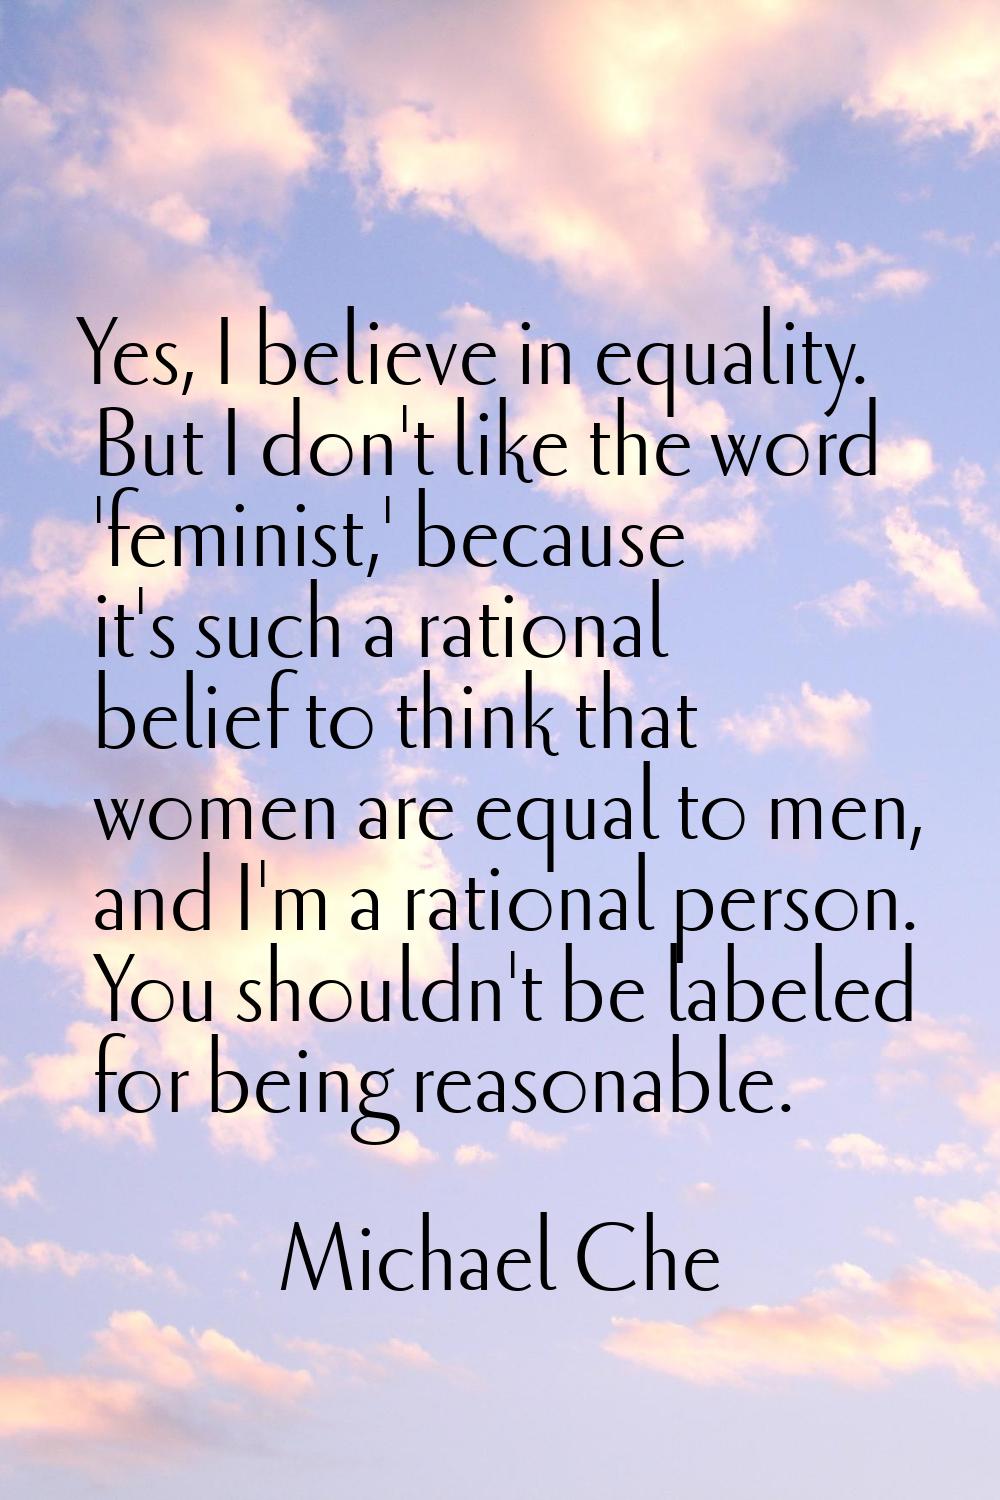 Yes, I believe in equality. But I don't like the word 'feminist,' because it's such a rational beli